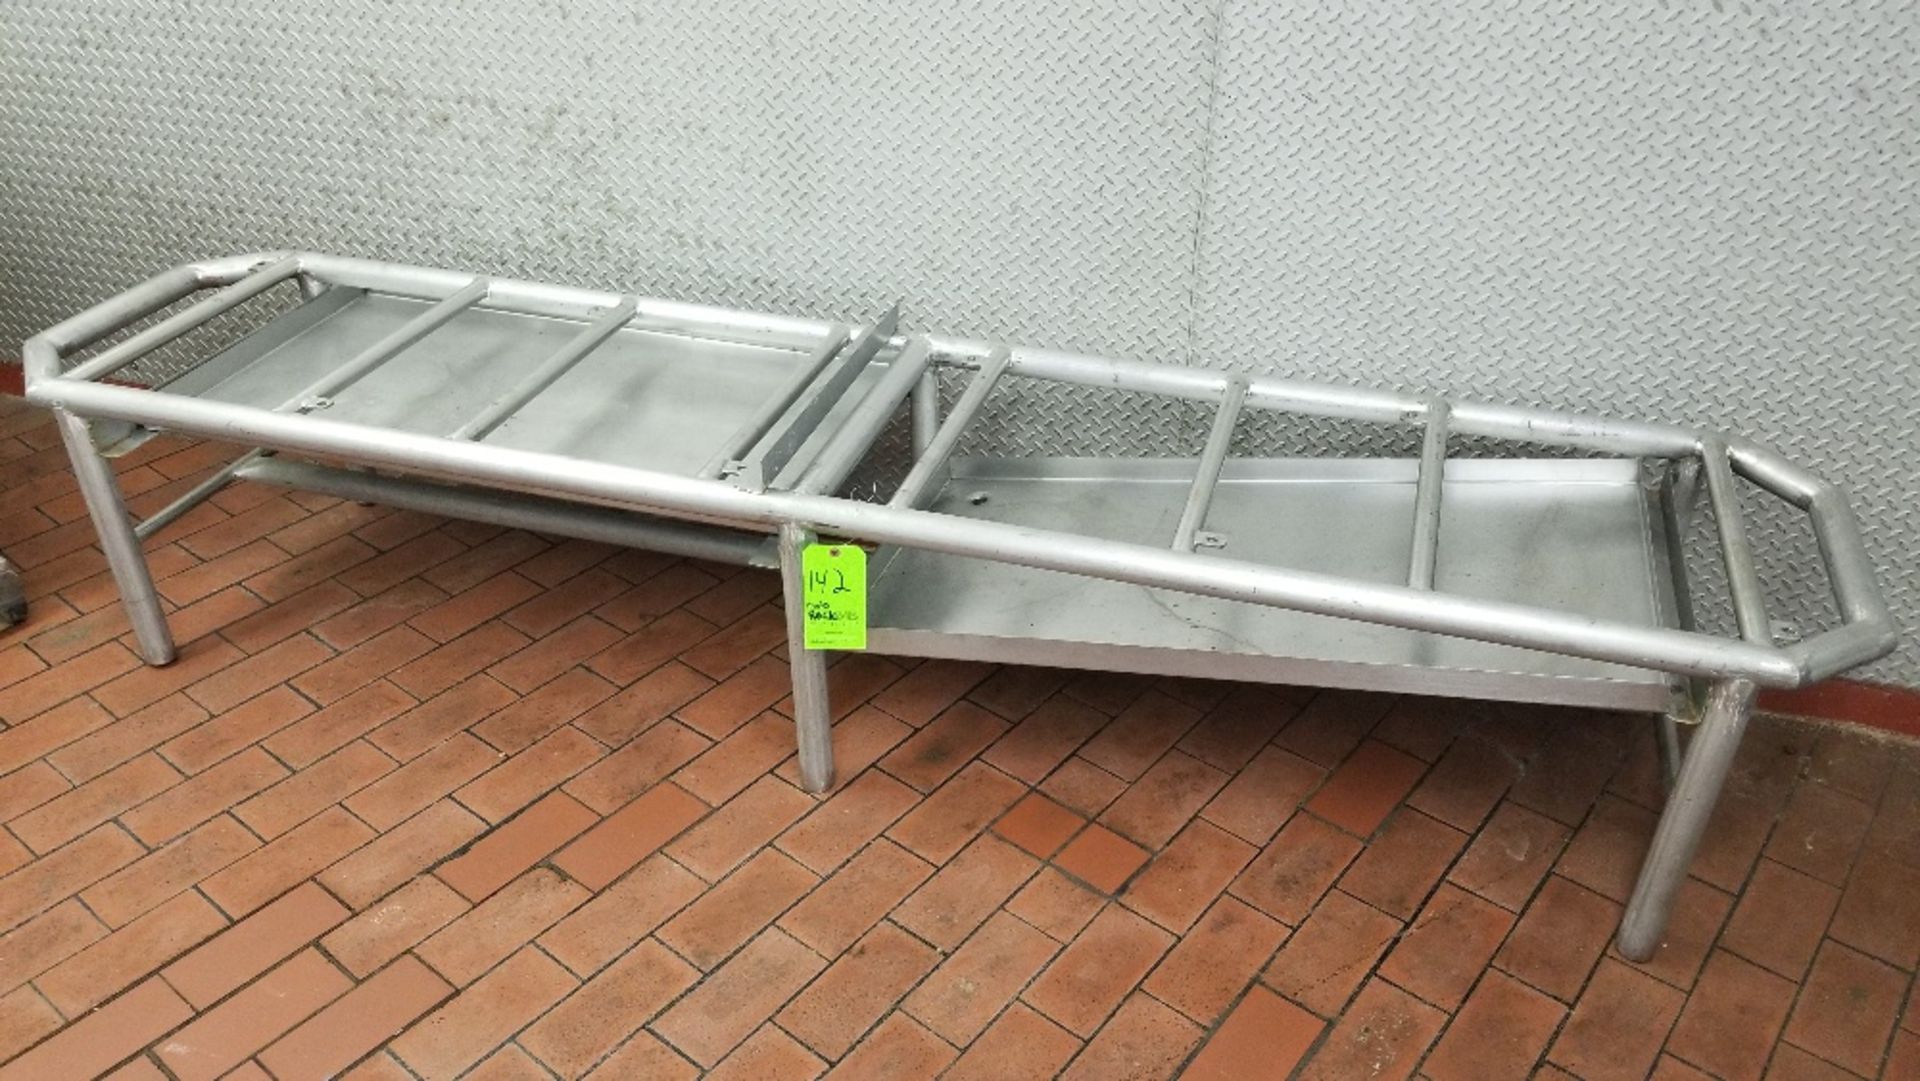 ~8 ft. L x 22" W x 19" H S/S Mold Rack Table